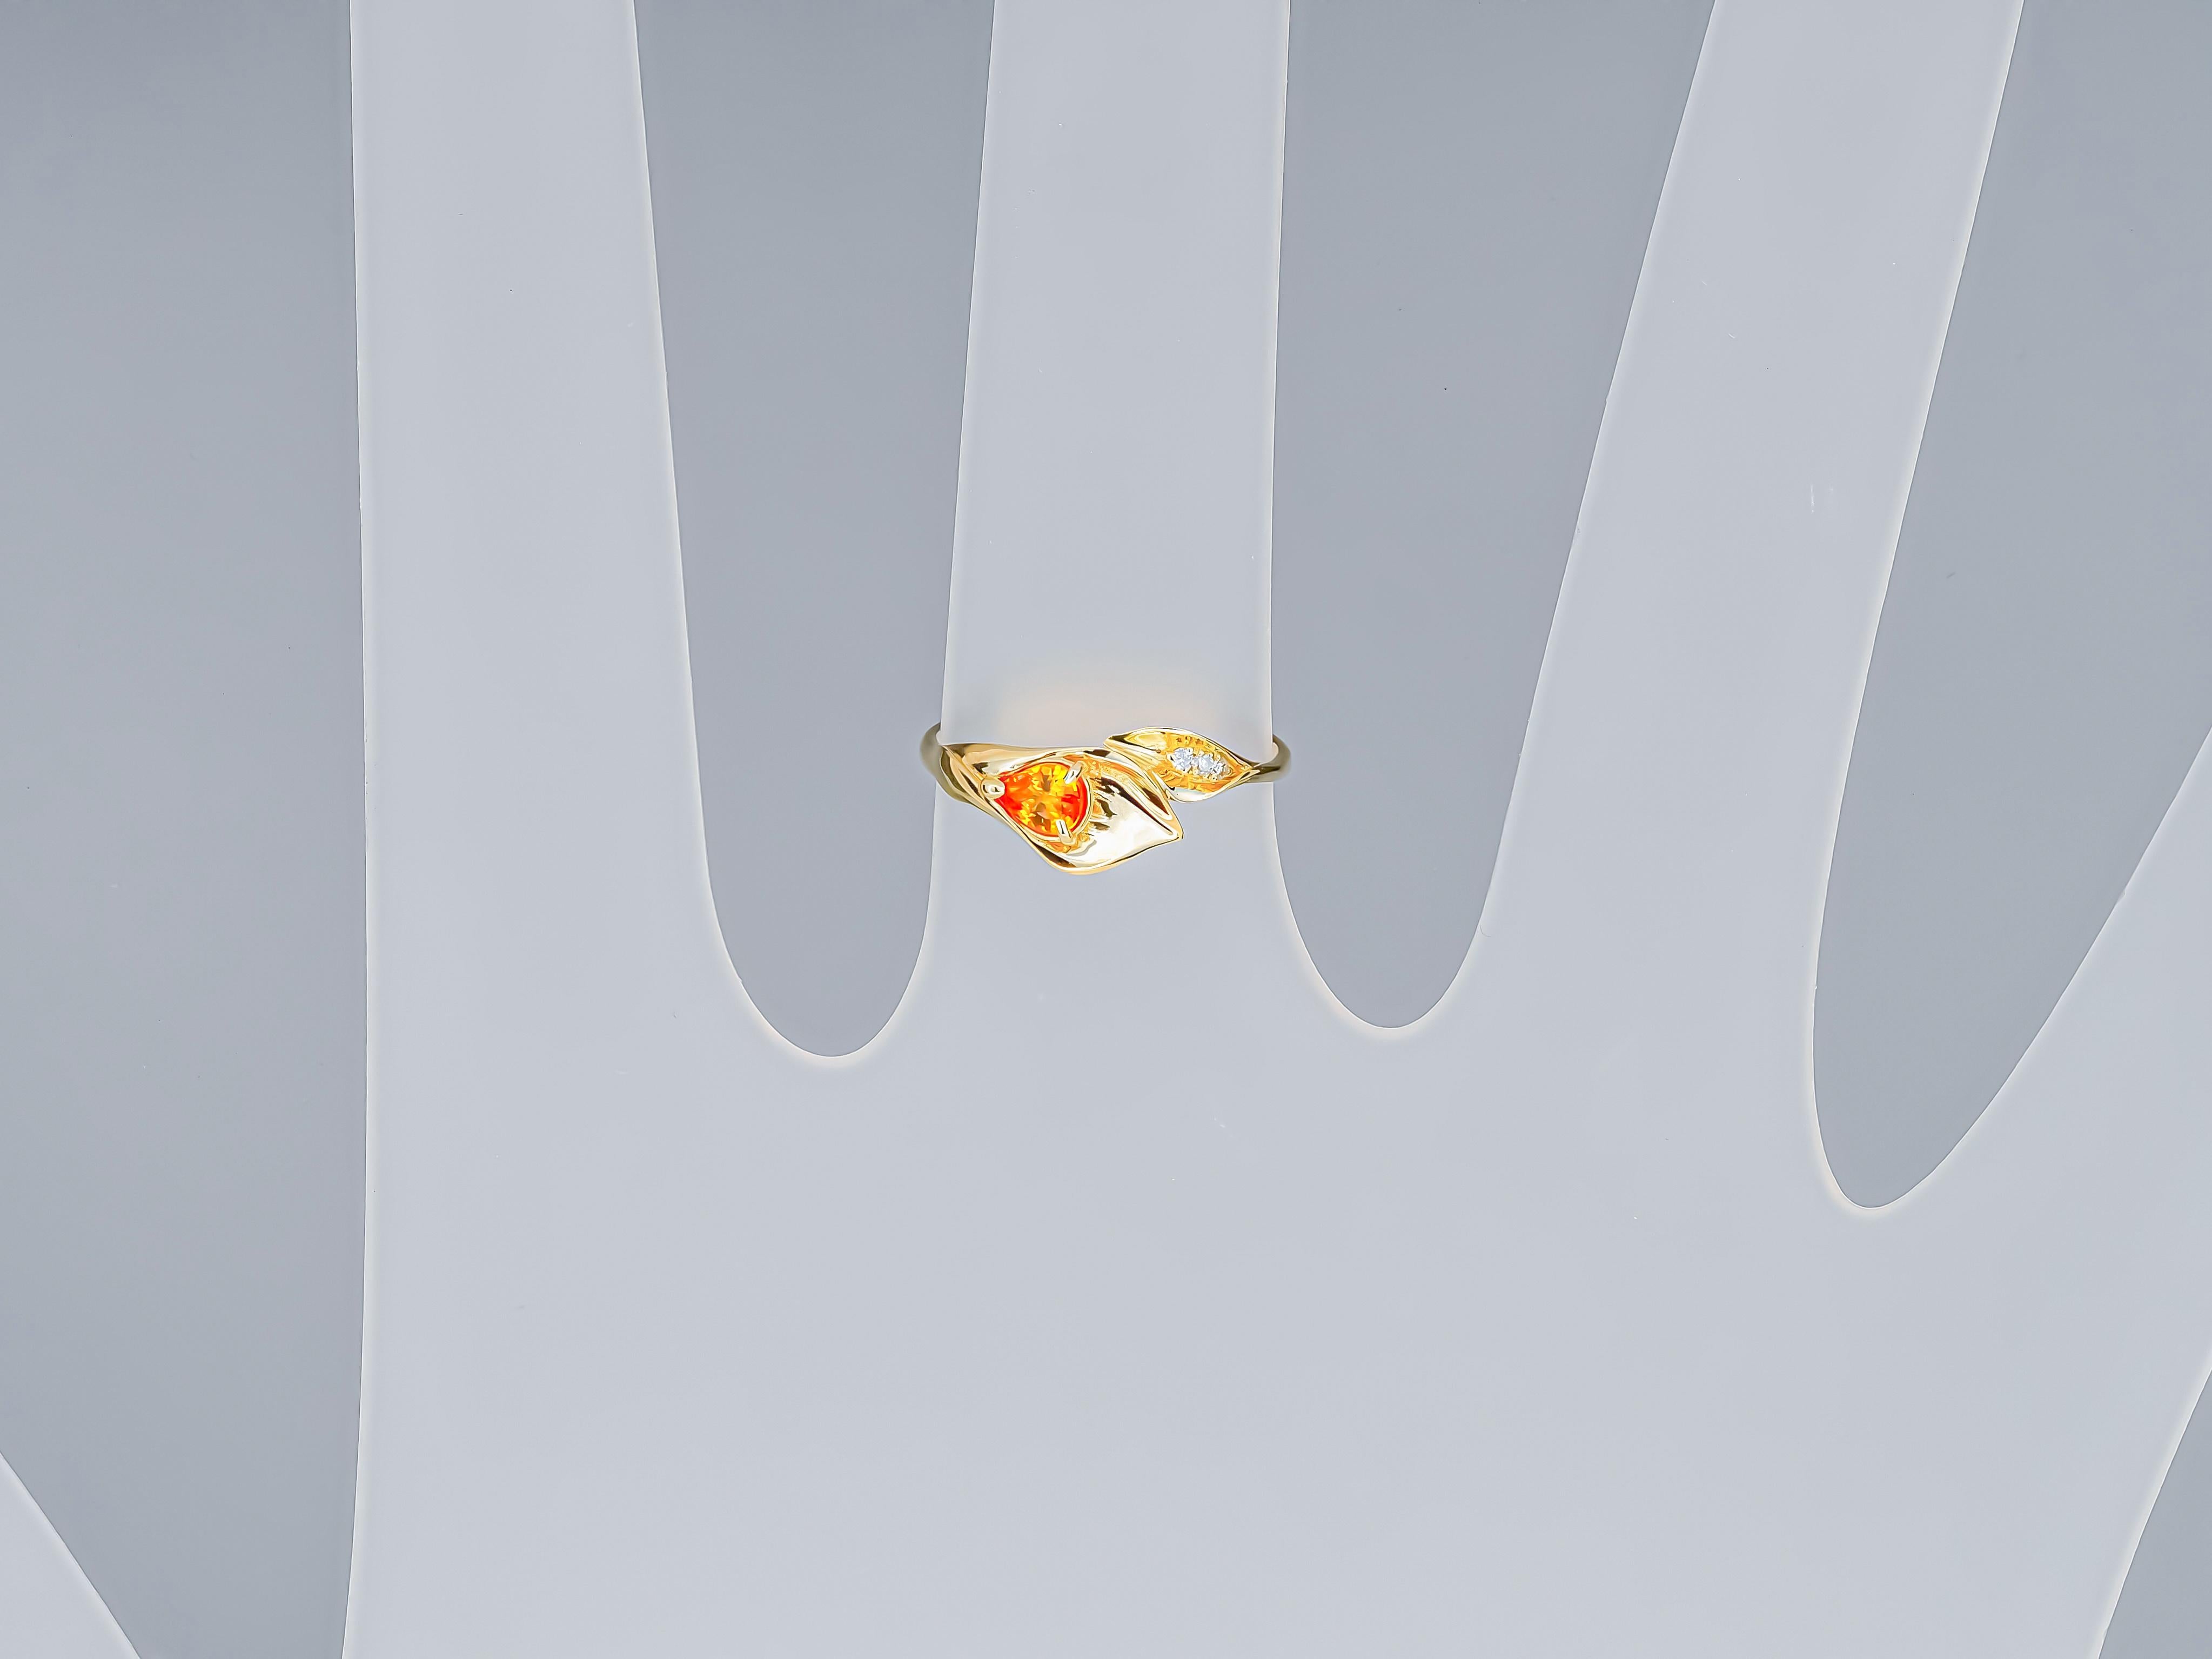 14 kt gold ring with sapphire and diamonds. Lily calla gold ring.
Weight: 1.80 g.
Central stone: Sapphire
Weight: 0.70 ct.
Yellow color, pear cut.
Clarity: Transparent with inclusions
Surrounding stones:
Diamonds: 3 pieces x 0.0 1ct = 0.03 ct, G/VS,